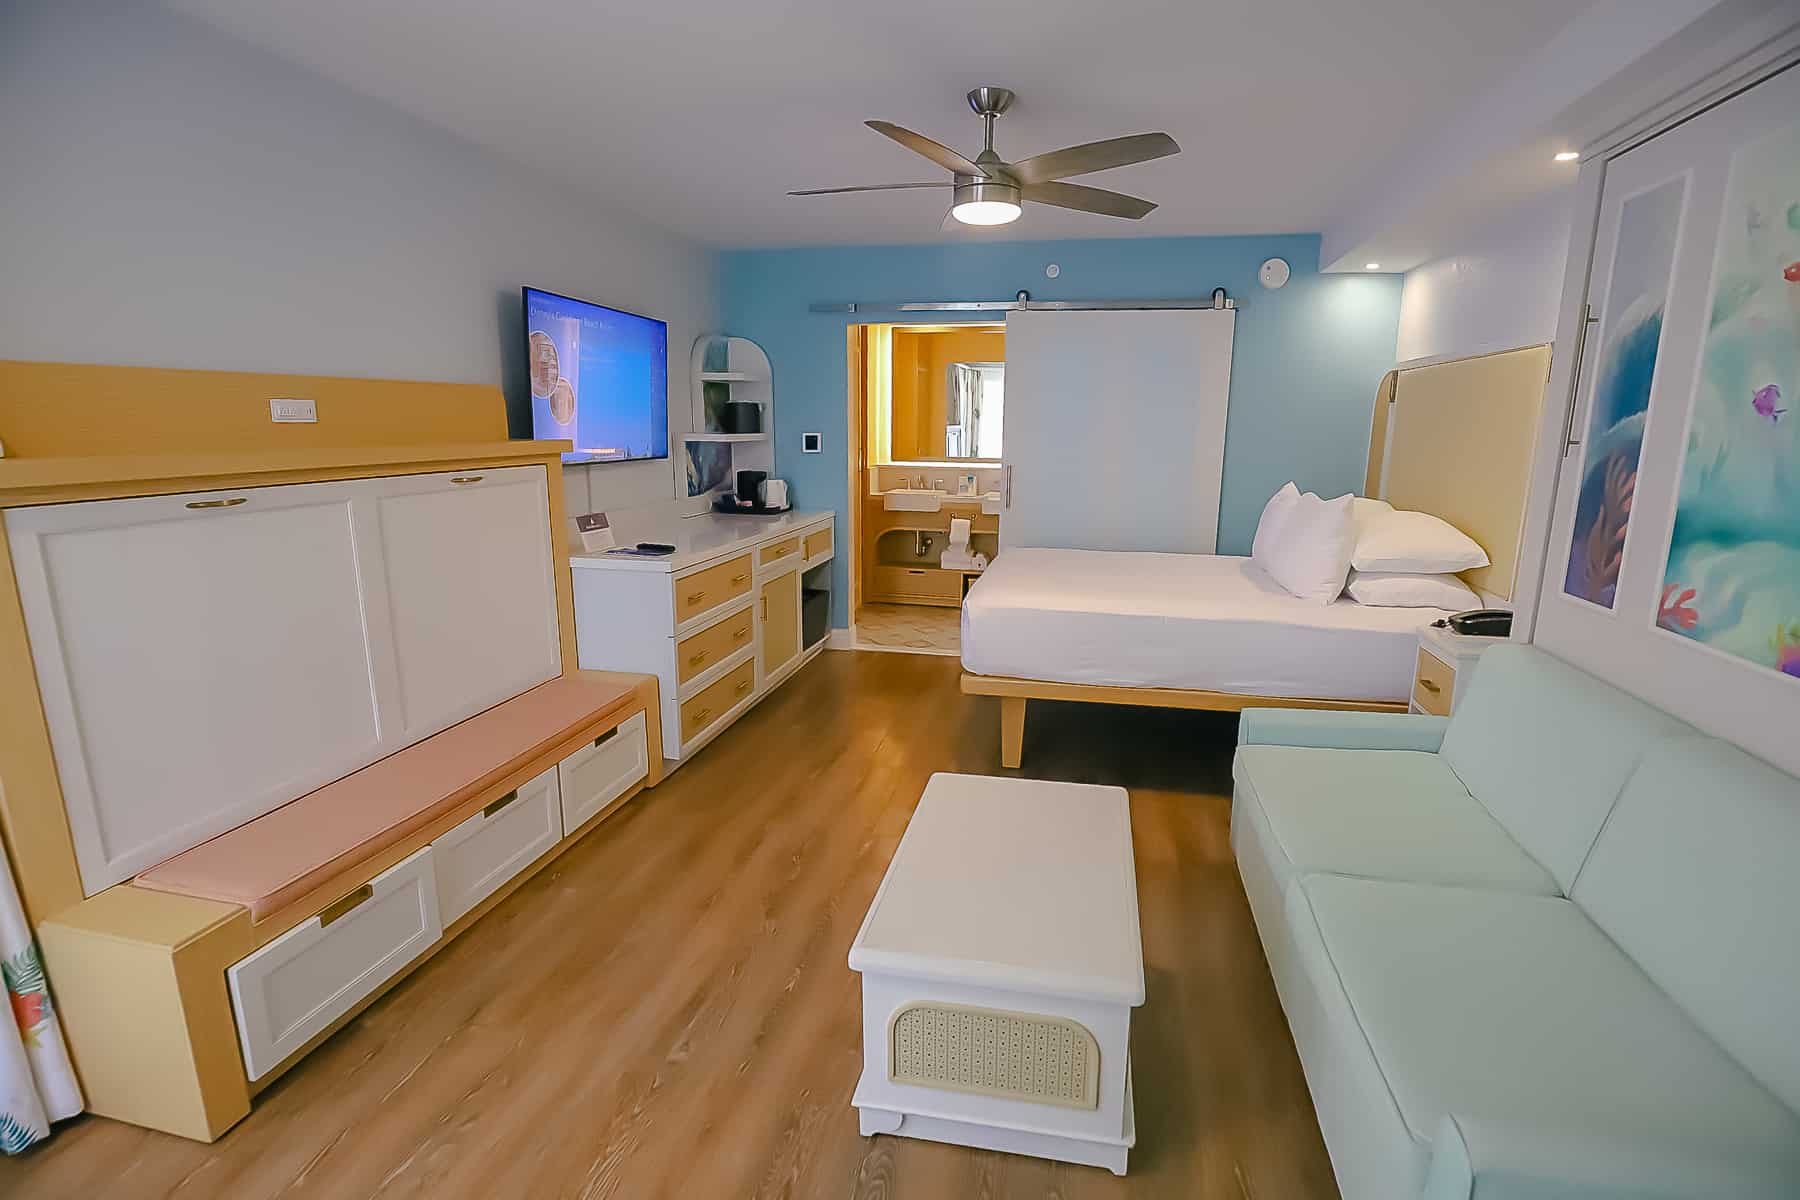 The New Little Mermaid Rooms at Disney’s Caribbean Beach Resort (Photos and Video)